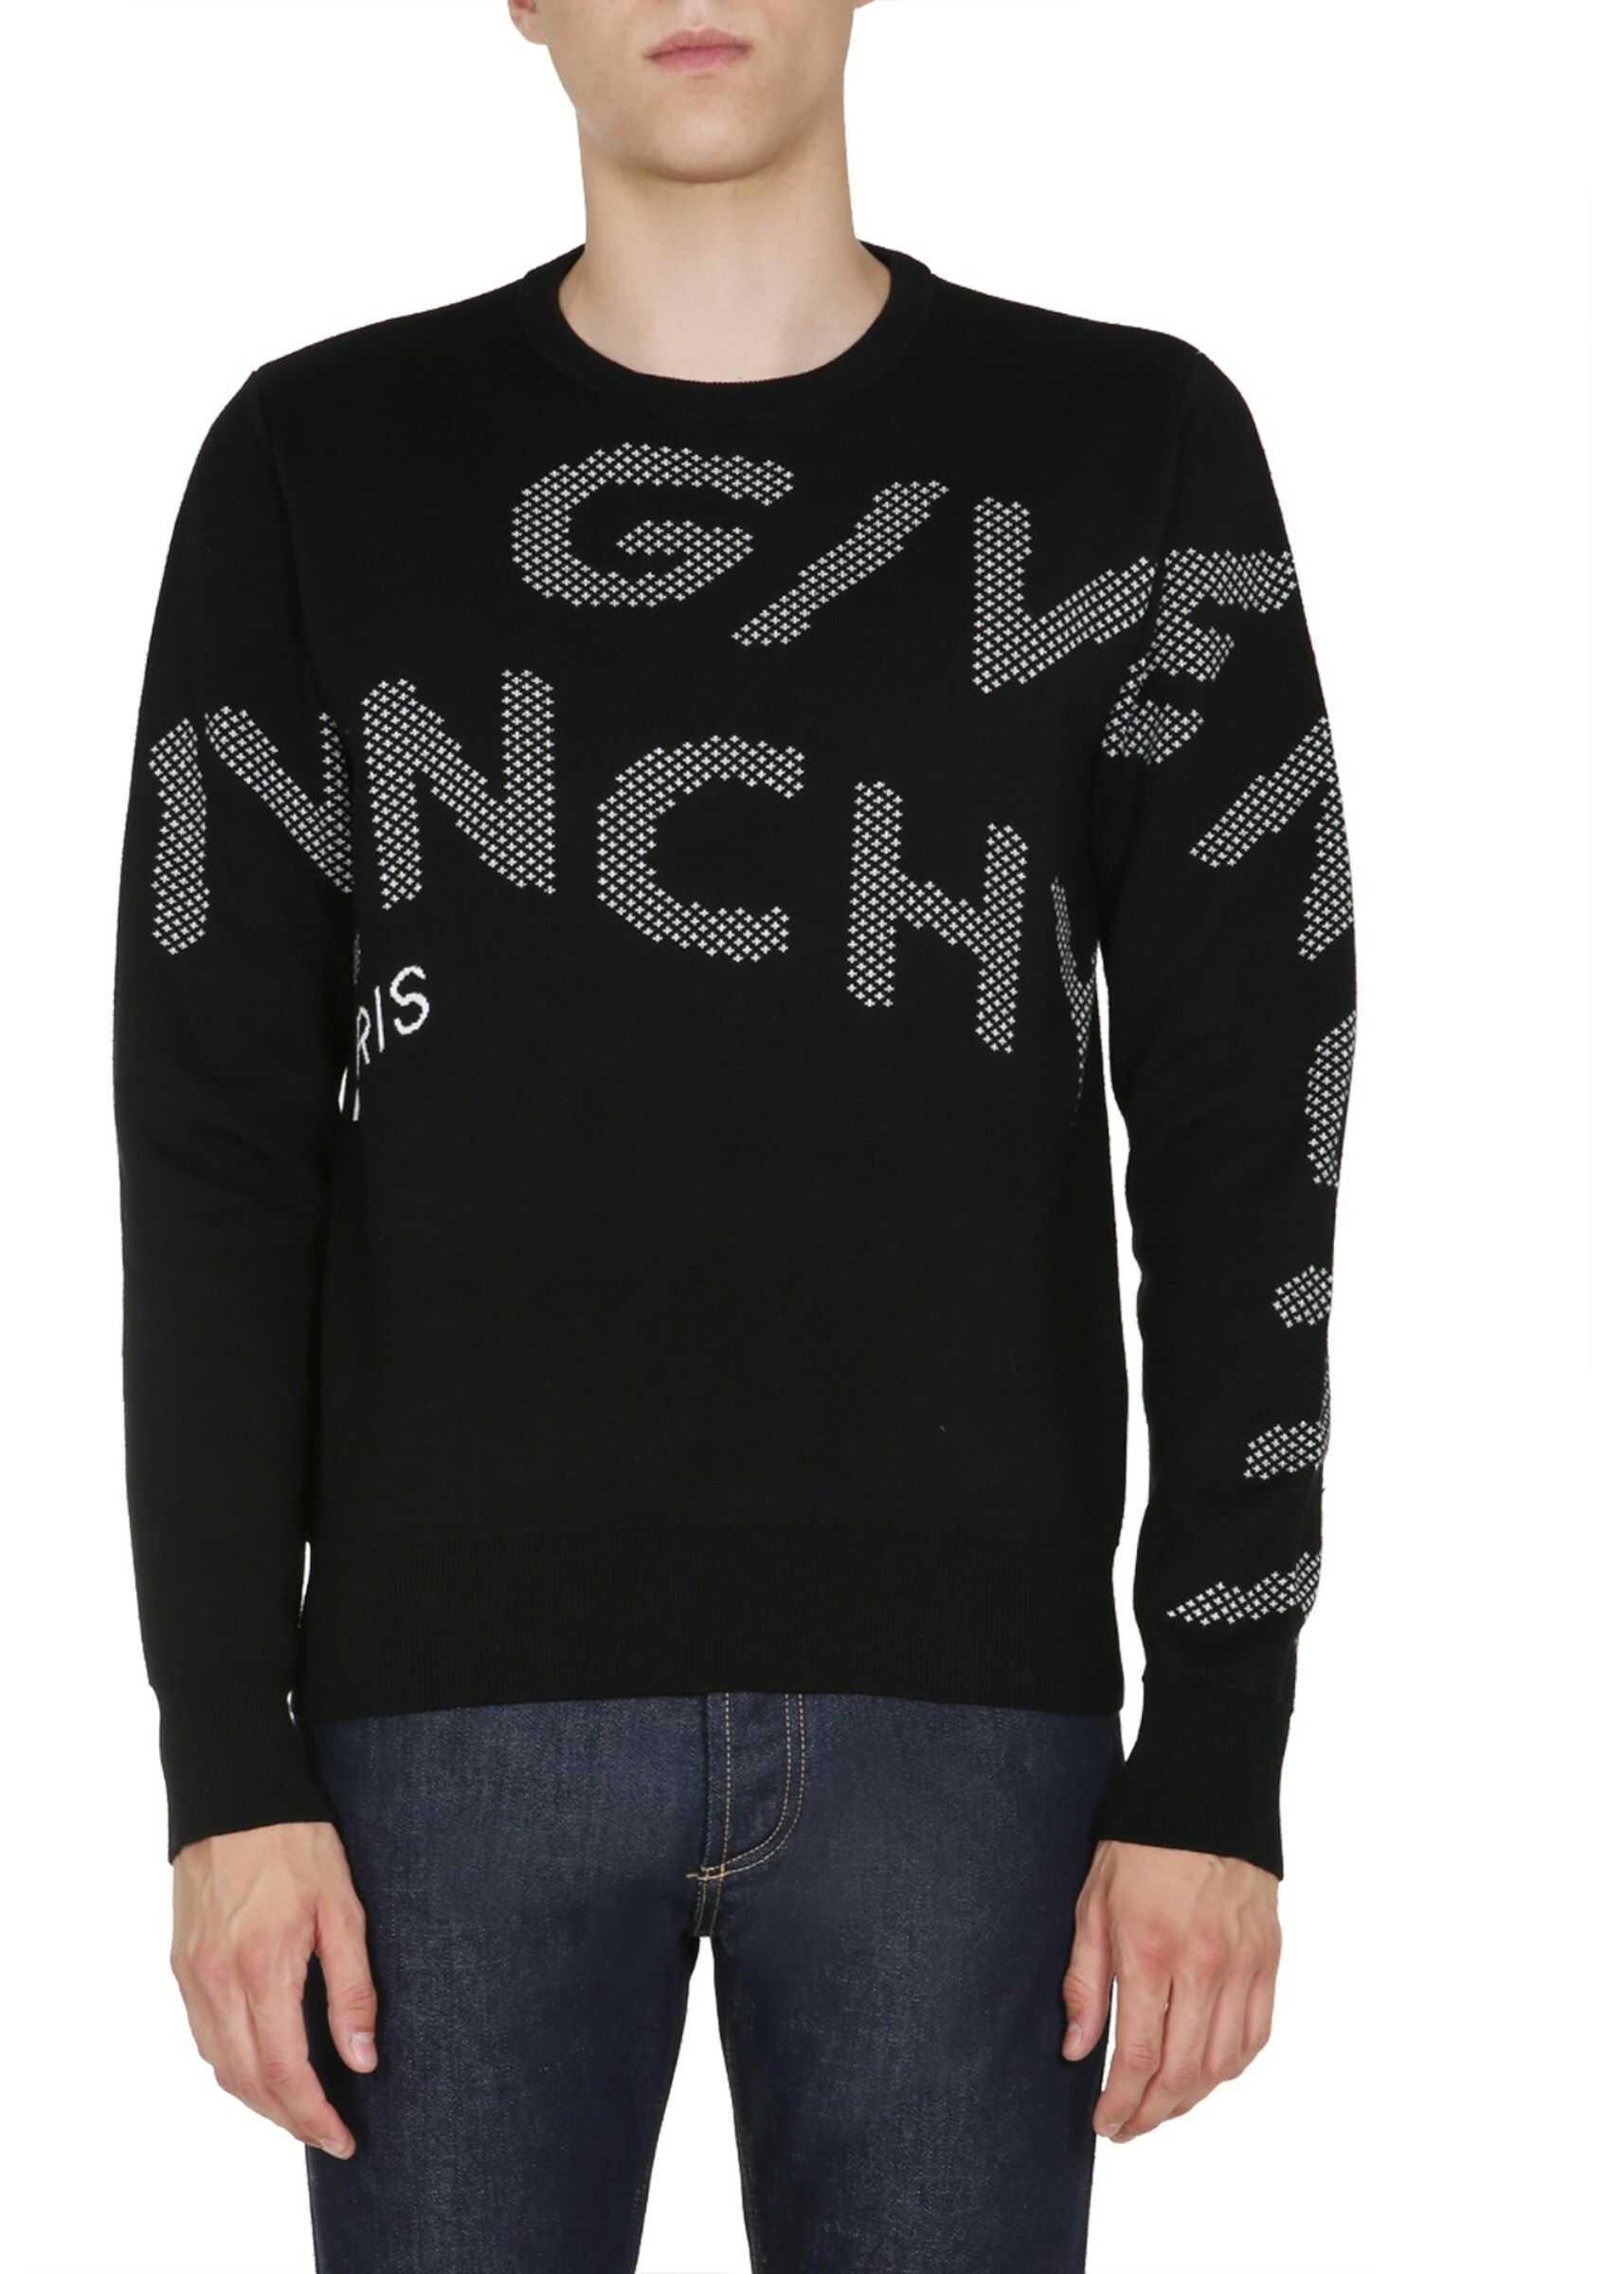 Givenchy Crew Neck Sweater BLACK